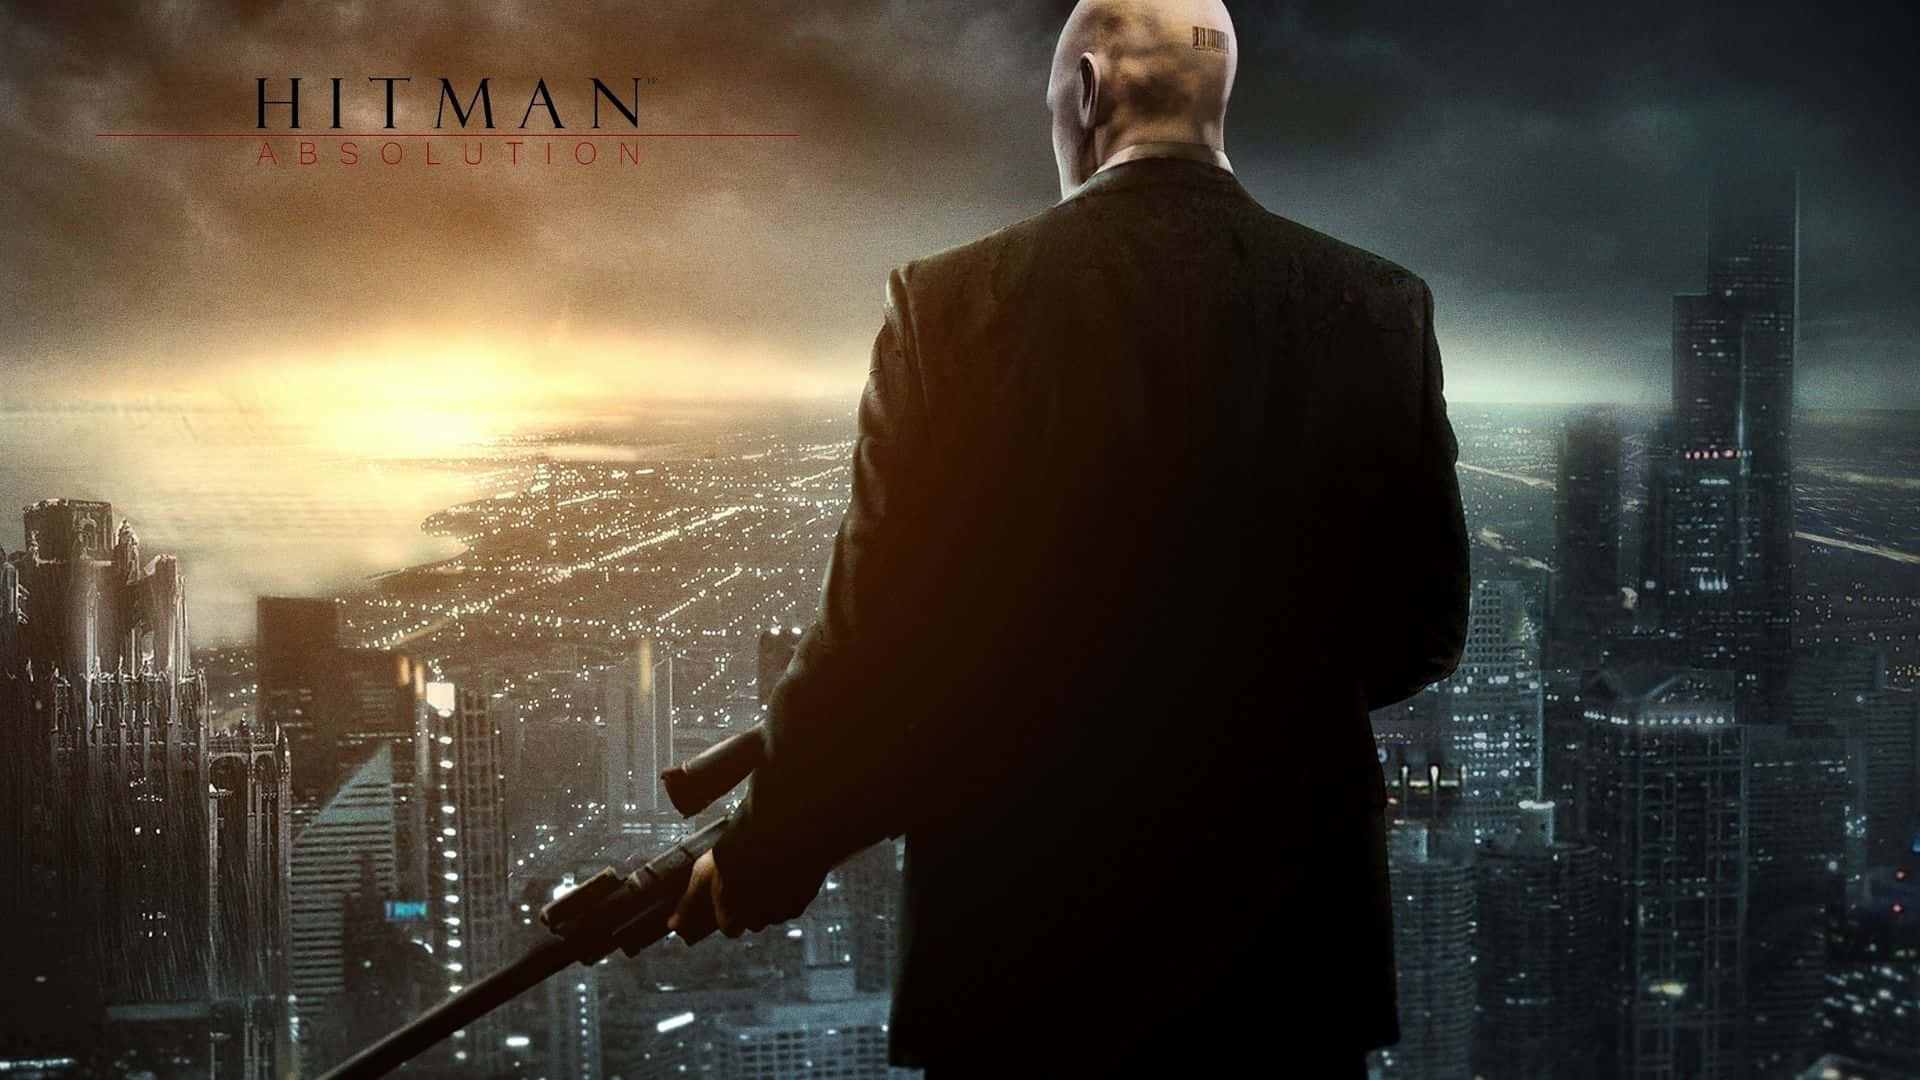 Agent 47, the Hitman in "Hitman Absolution"